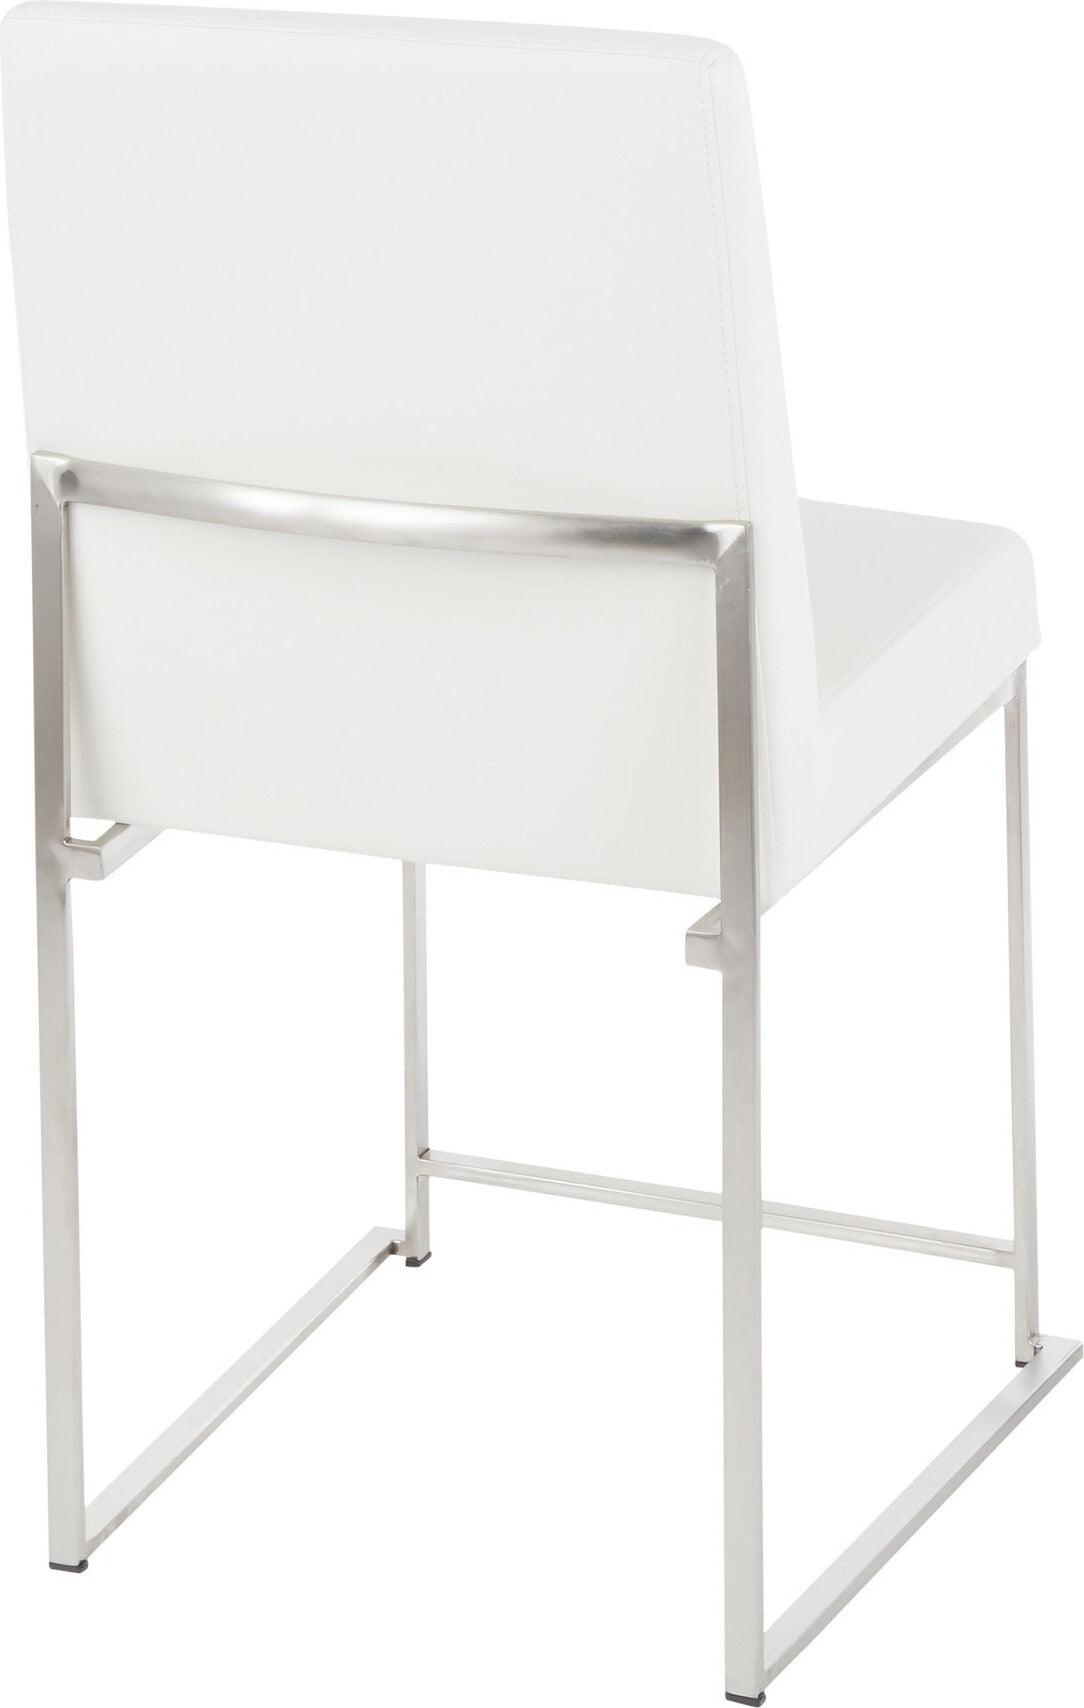 Lumisource Dining Chairs - High Back Fuji Contemporary Dining Chair in Stainless Steel and White Faux Leather (Set of 2)